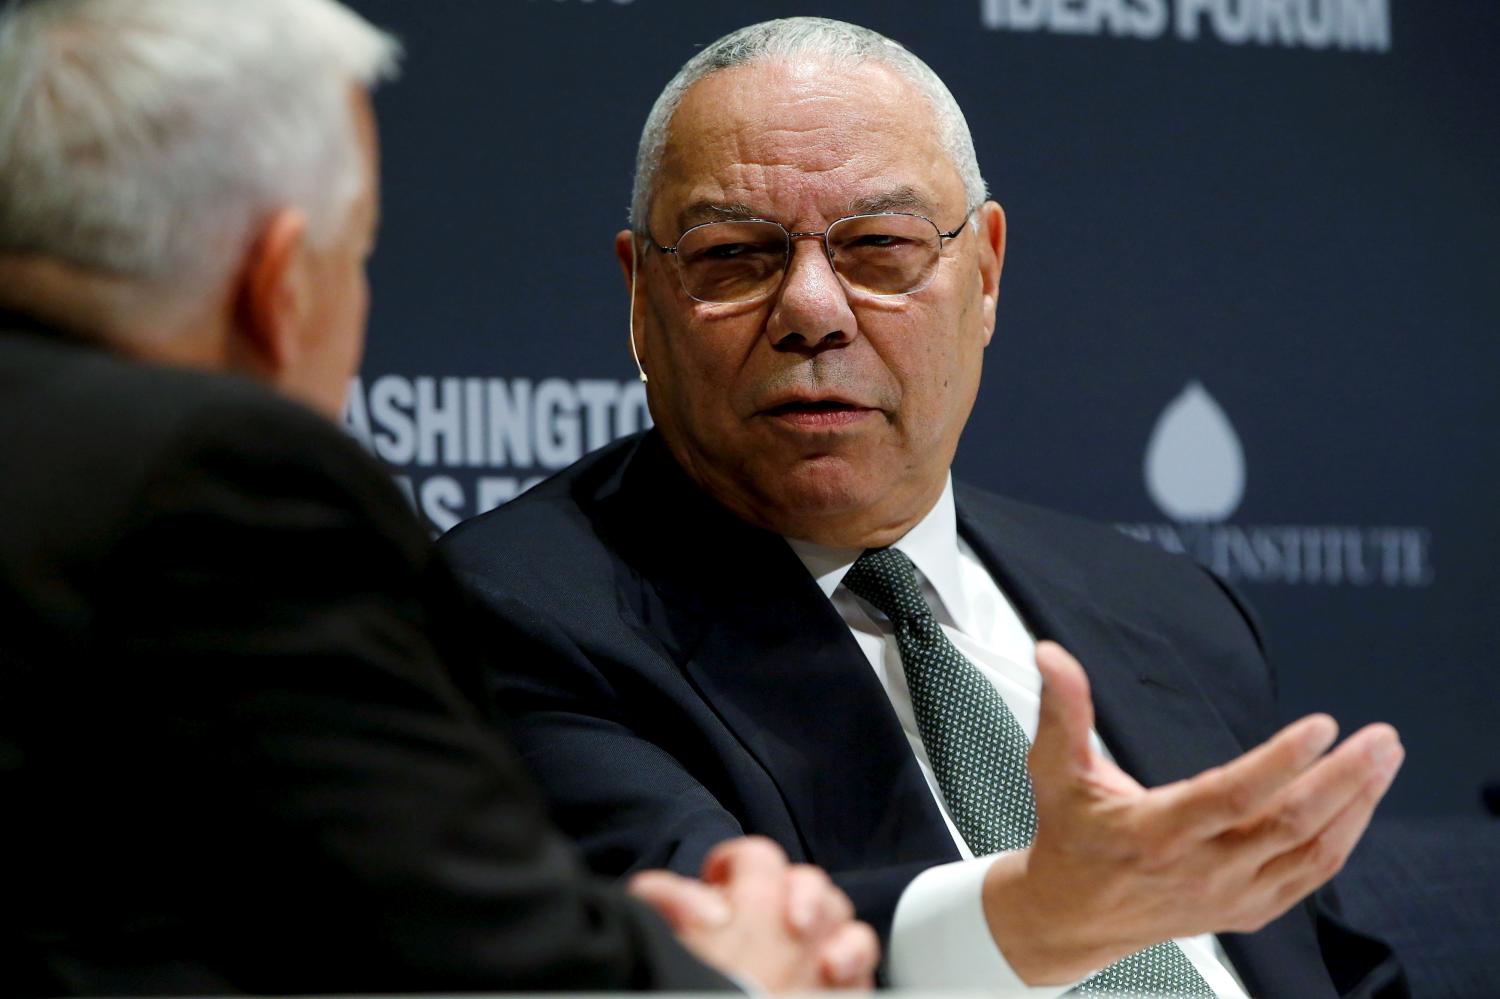 FILE PHOTO: Former U.S. Secretary of State Colin Powell (R) takes part in an onstage interview with Aspen Institute President and CEO Walter Isaacson (L) at the Washington Ideas Forum in Washington, September 30, 2015. REUTERS/Jonathan Ernst/File Photo